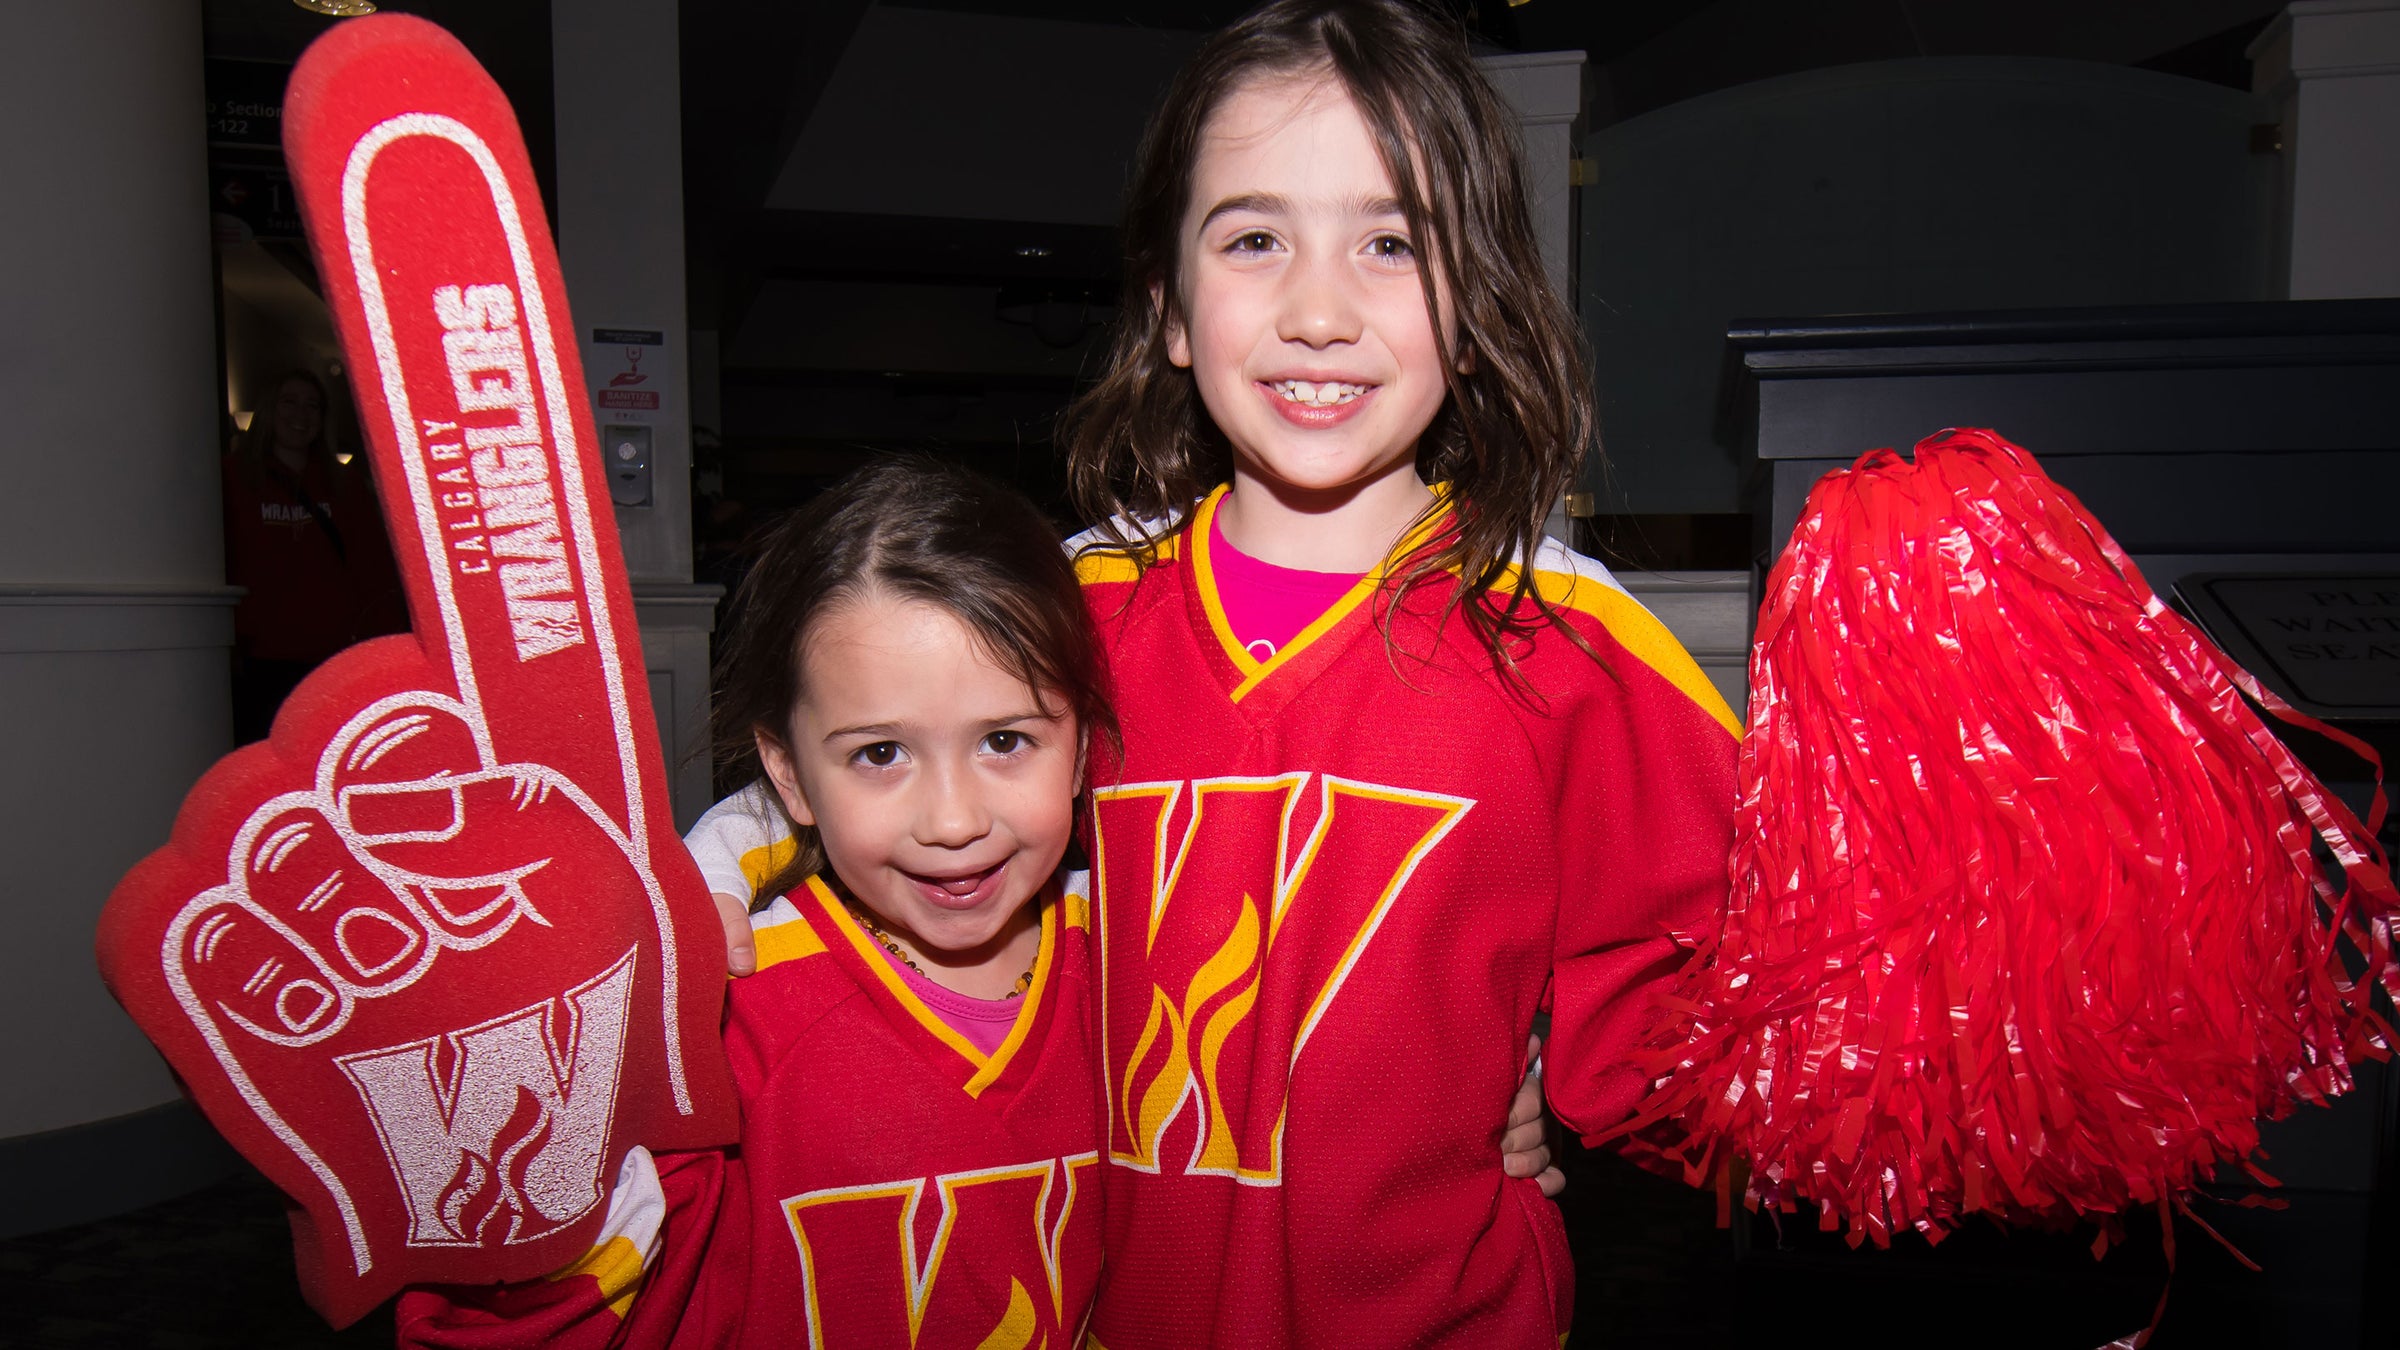 FLAMES  Child & Tot Apparel – CGY Team Store